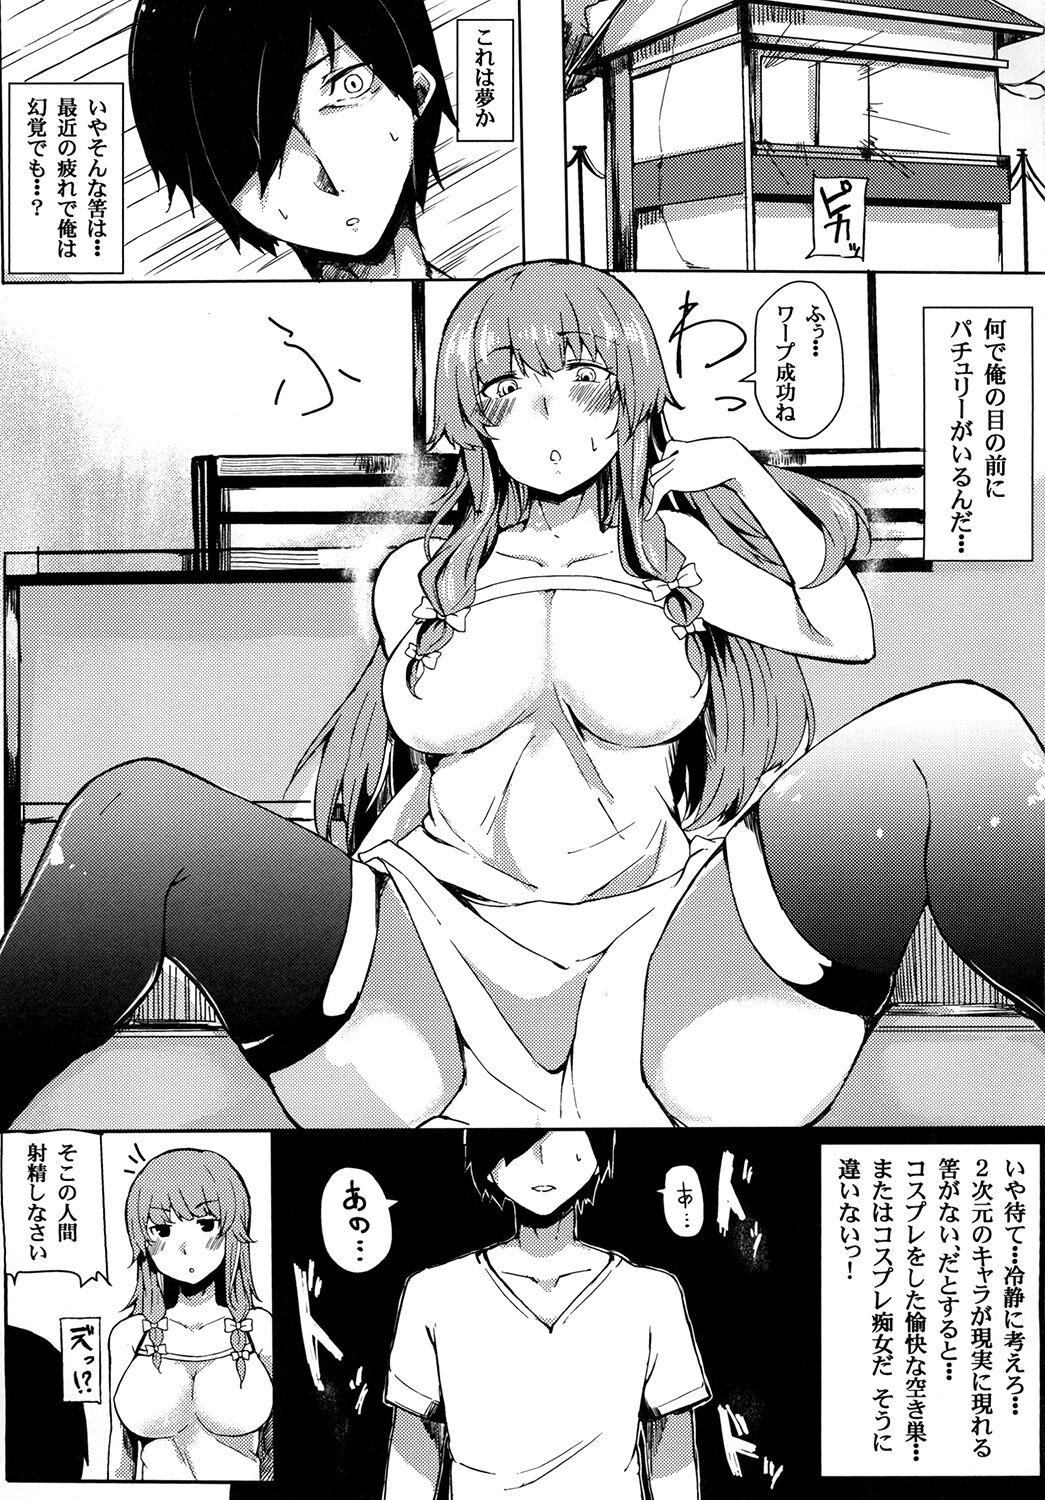 Dicks knowledge No life. - Touhou project Transsexual - Page 3